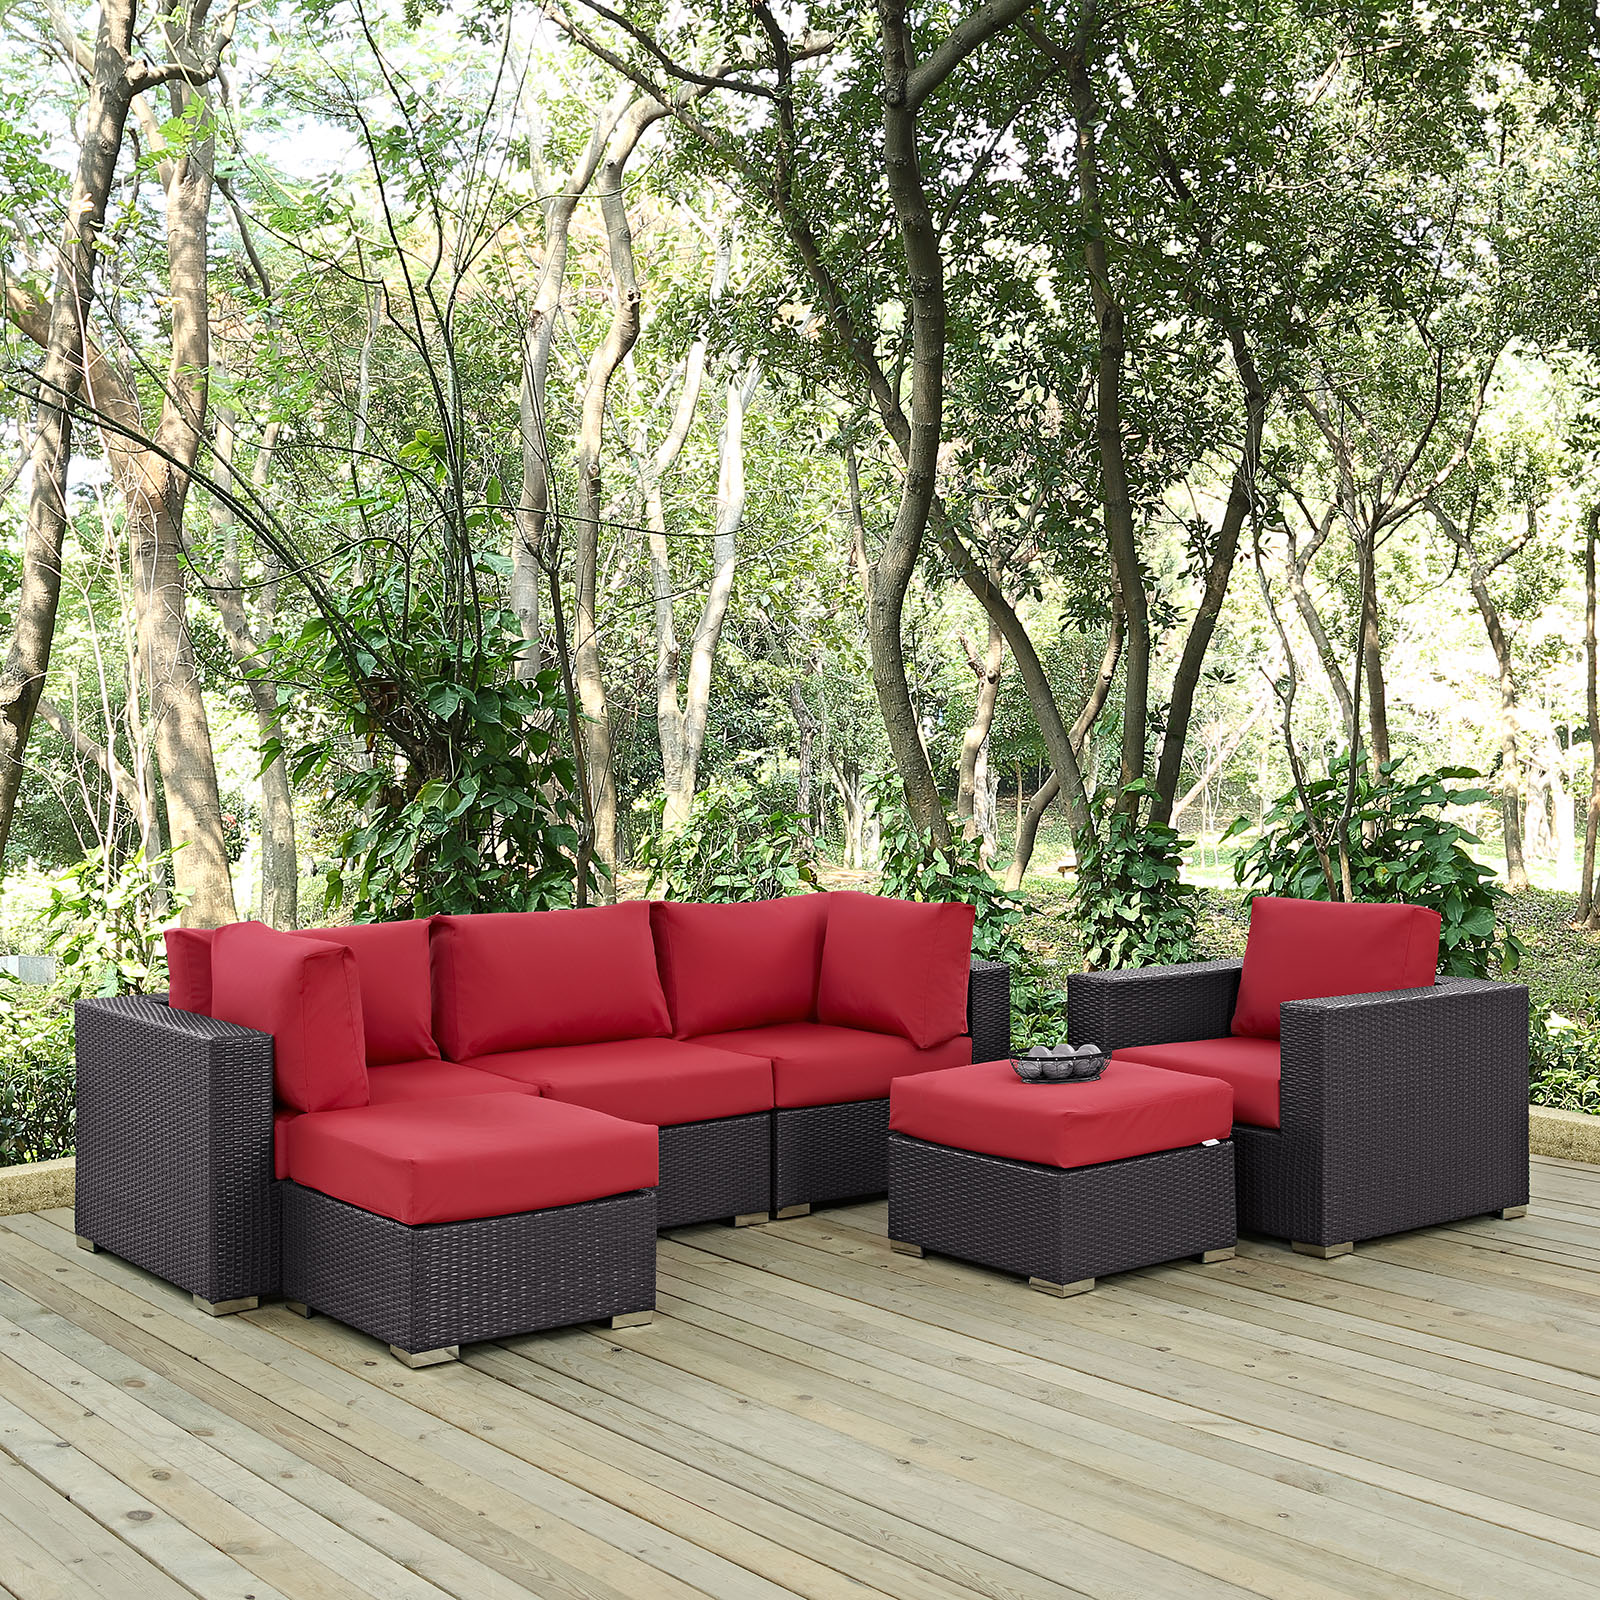 Modway Convene 6 Piece Patio Sofa Set in Espresso and Red - image 1 of 8